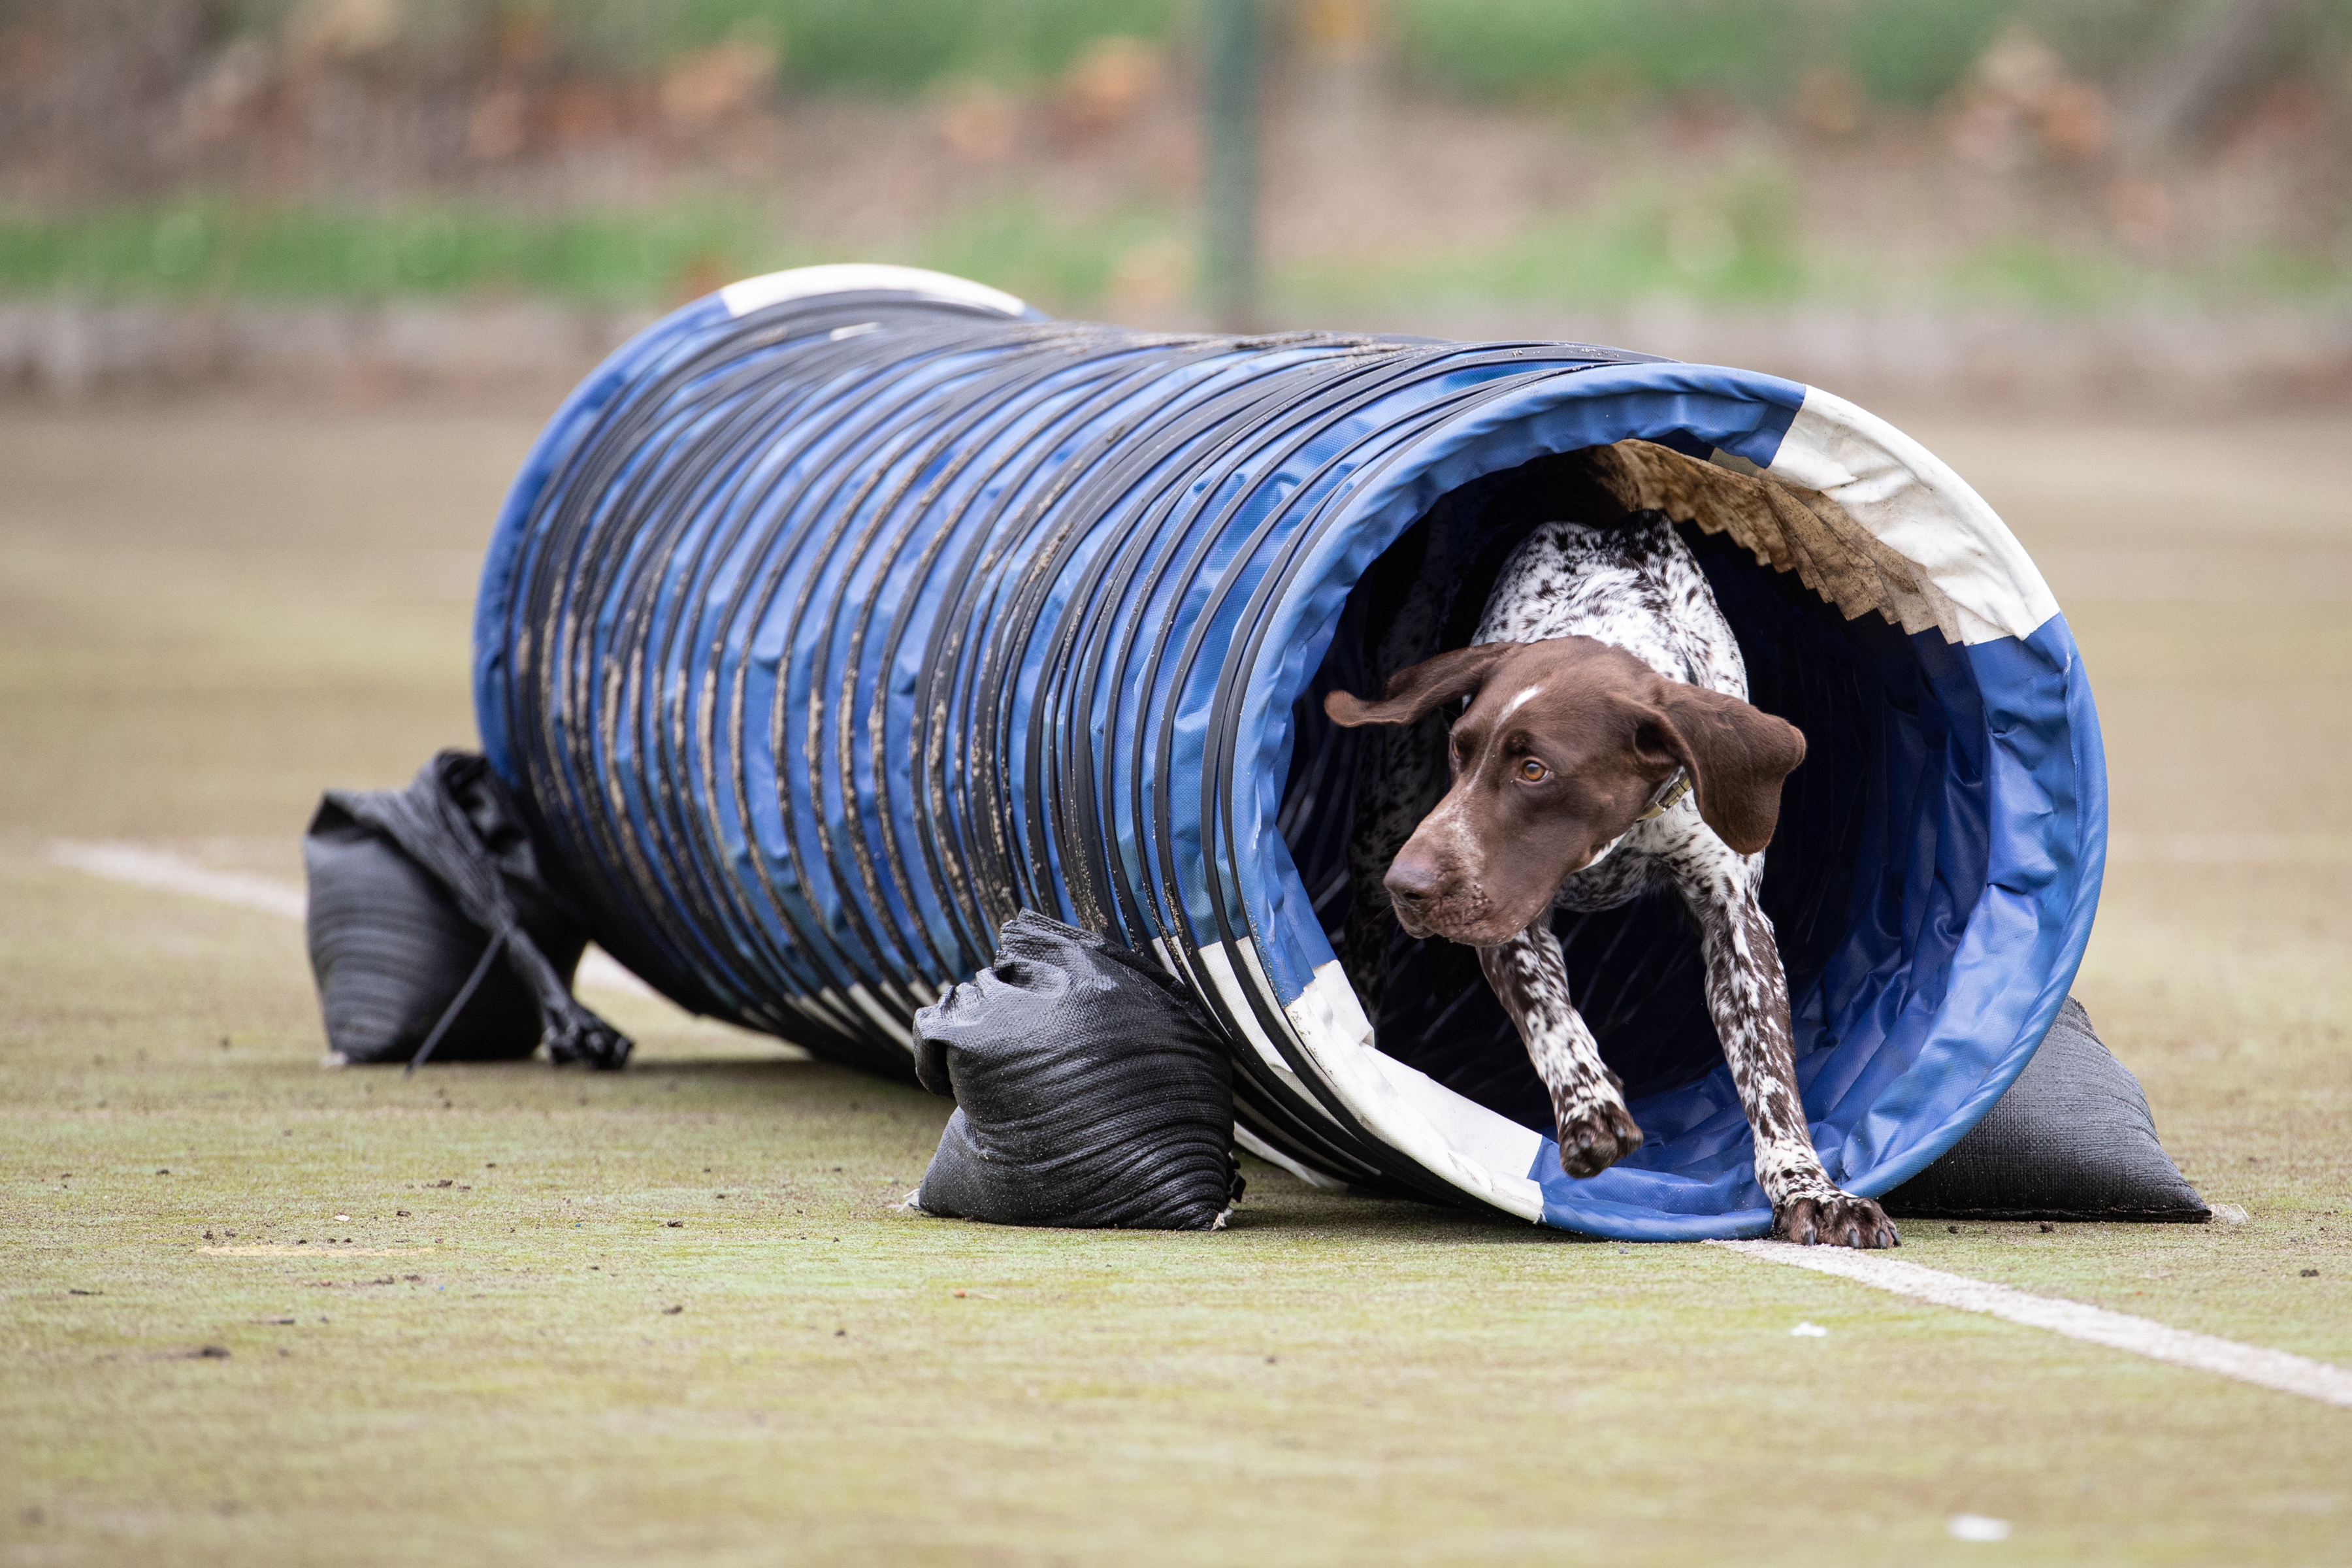 Image shows Military Working Dog running out of tunnel on agility course.